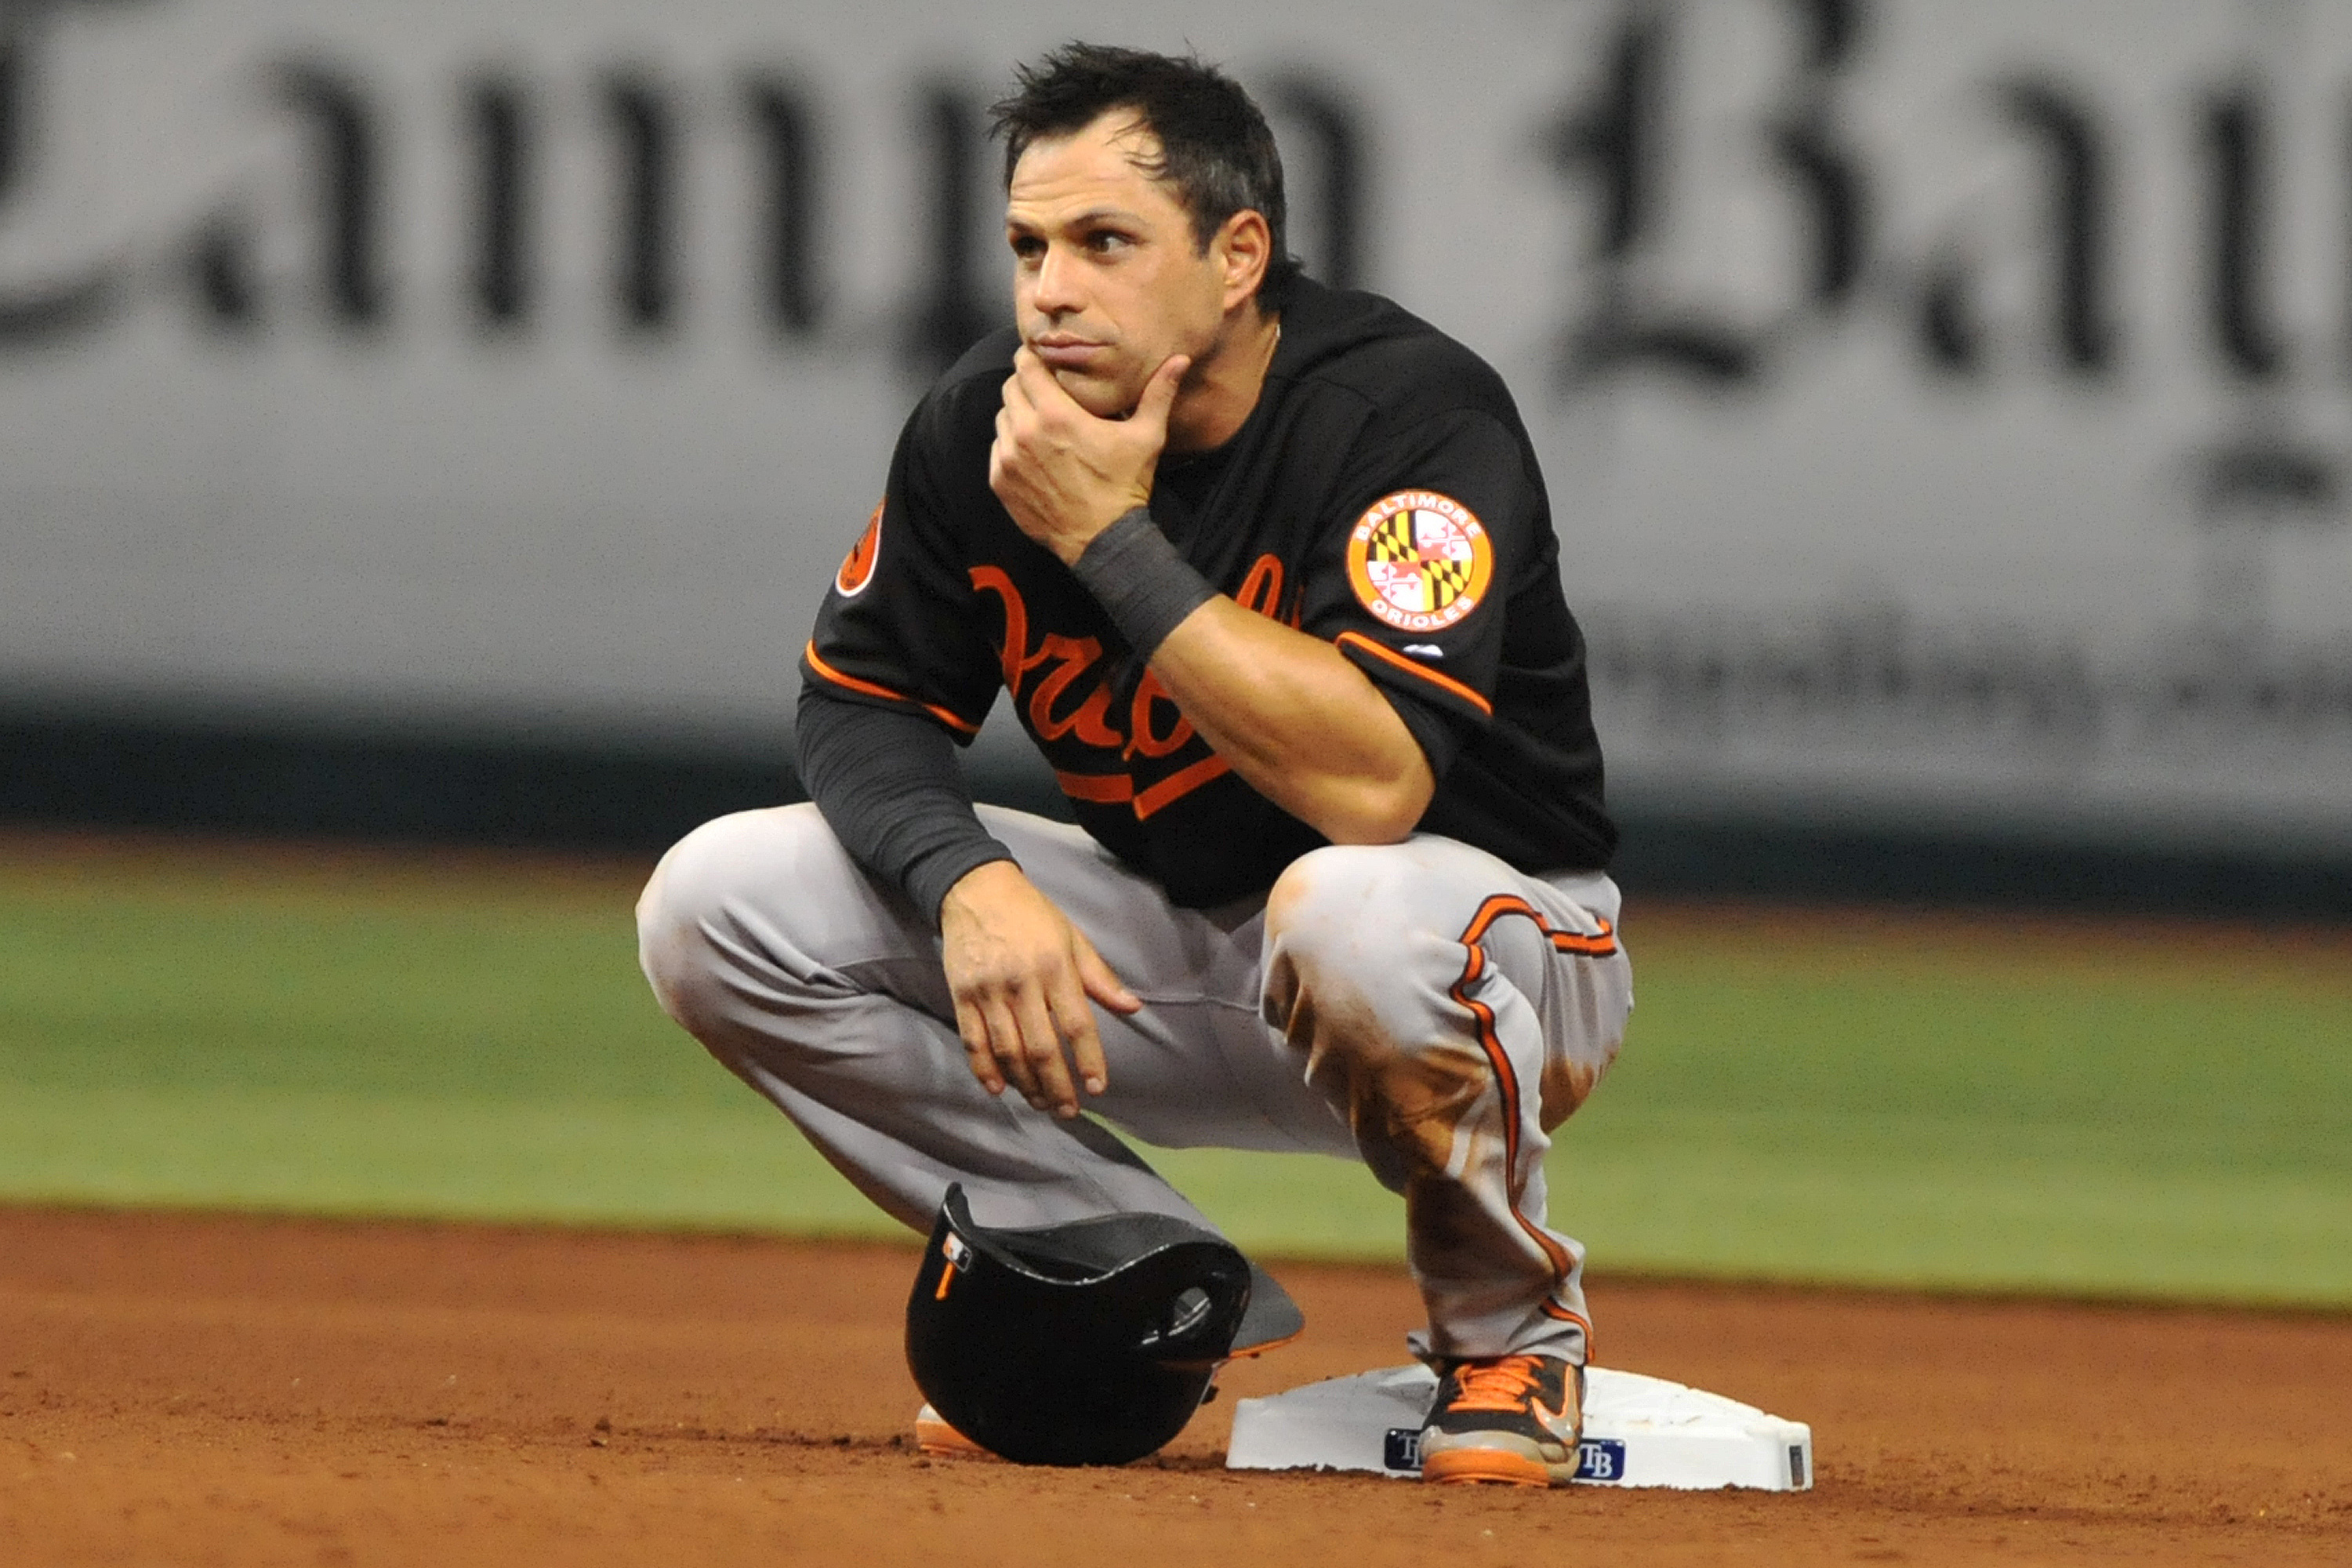 A conversation with Baltimore Orioles second baseman Brian Roberts -  Inspiring Athletes